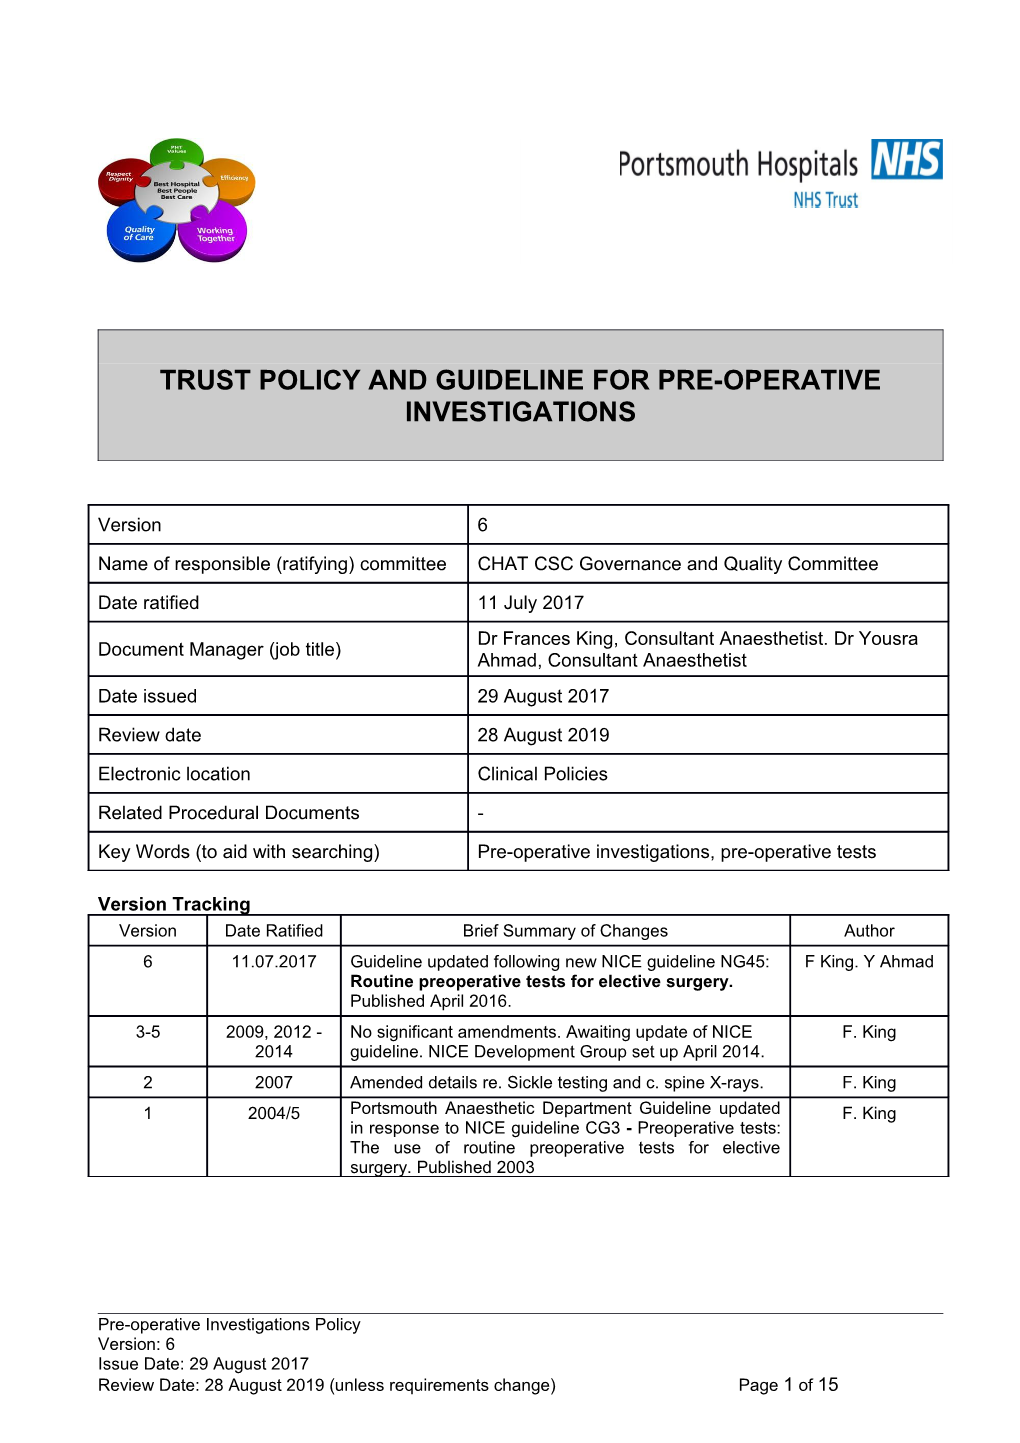 Trust Policy and Guideline for Pre-Operative Investigations